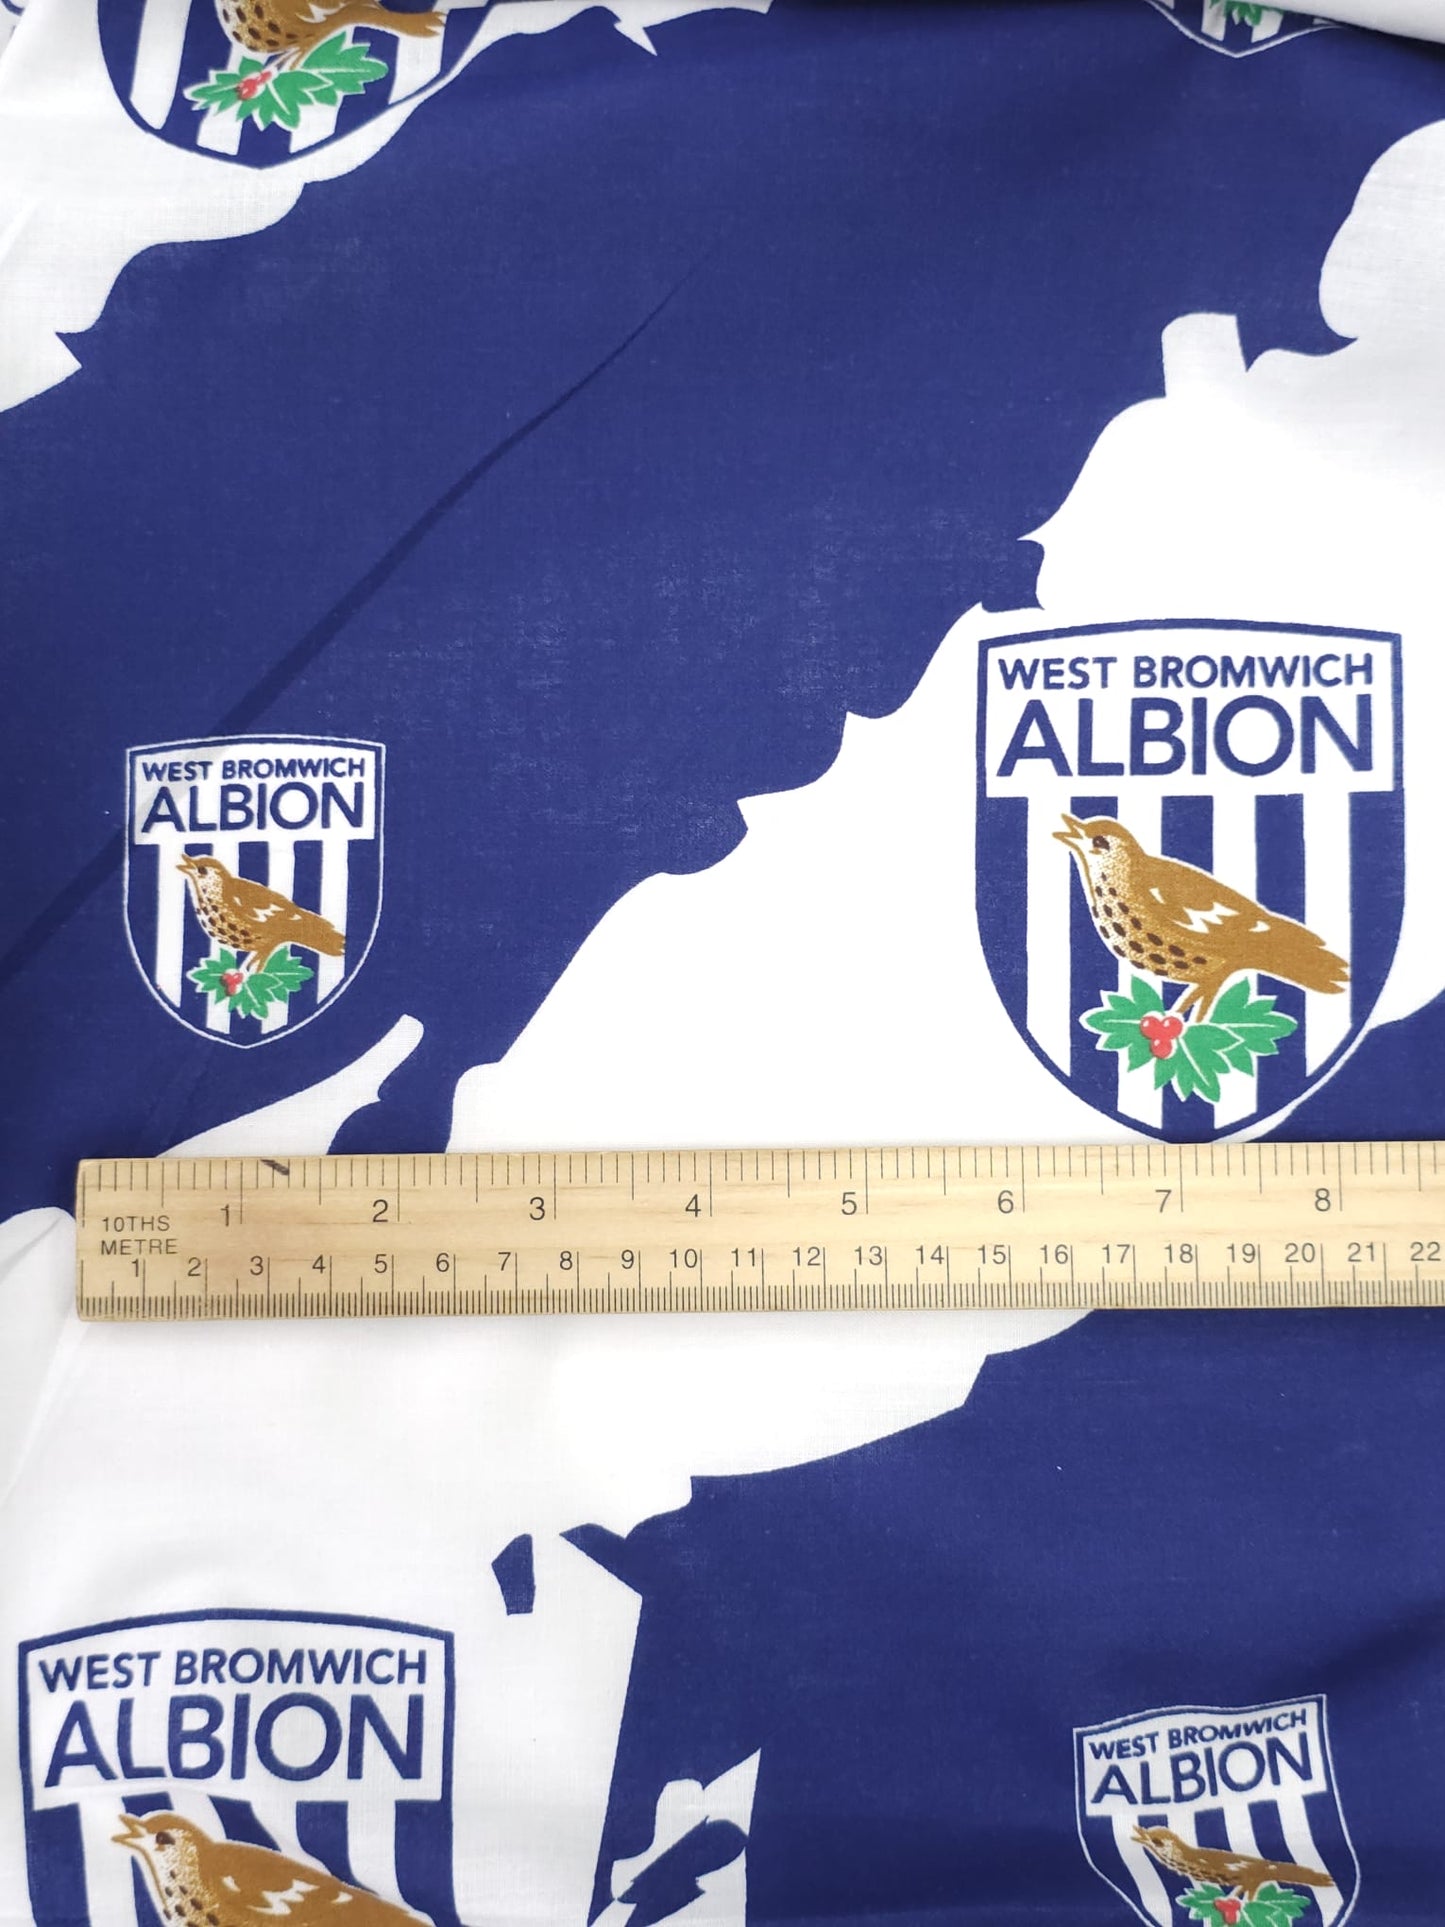 West Bromwich Albion 100% Cotton Football Club Fabric